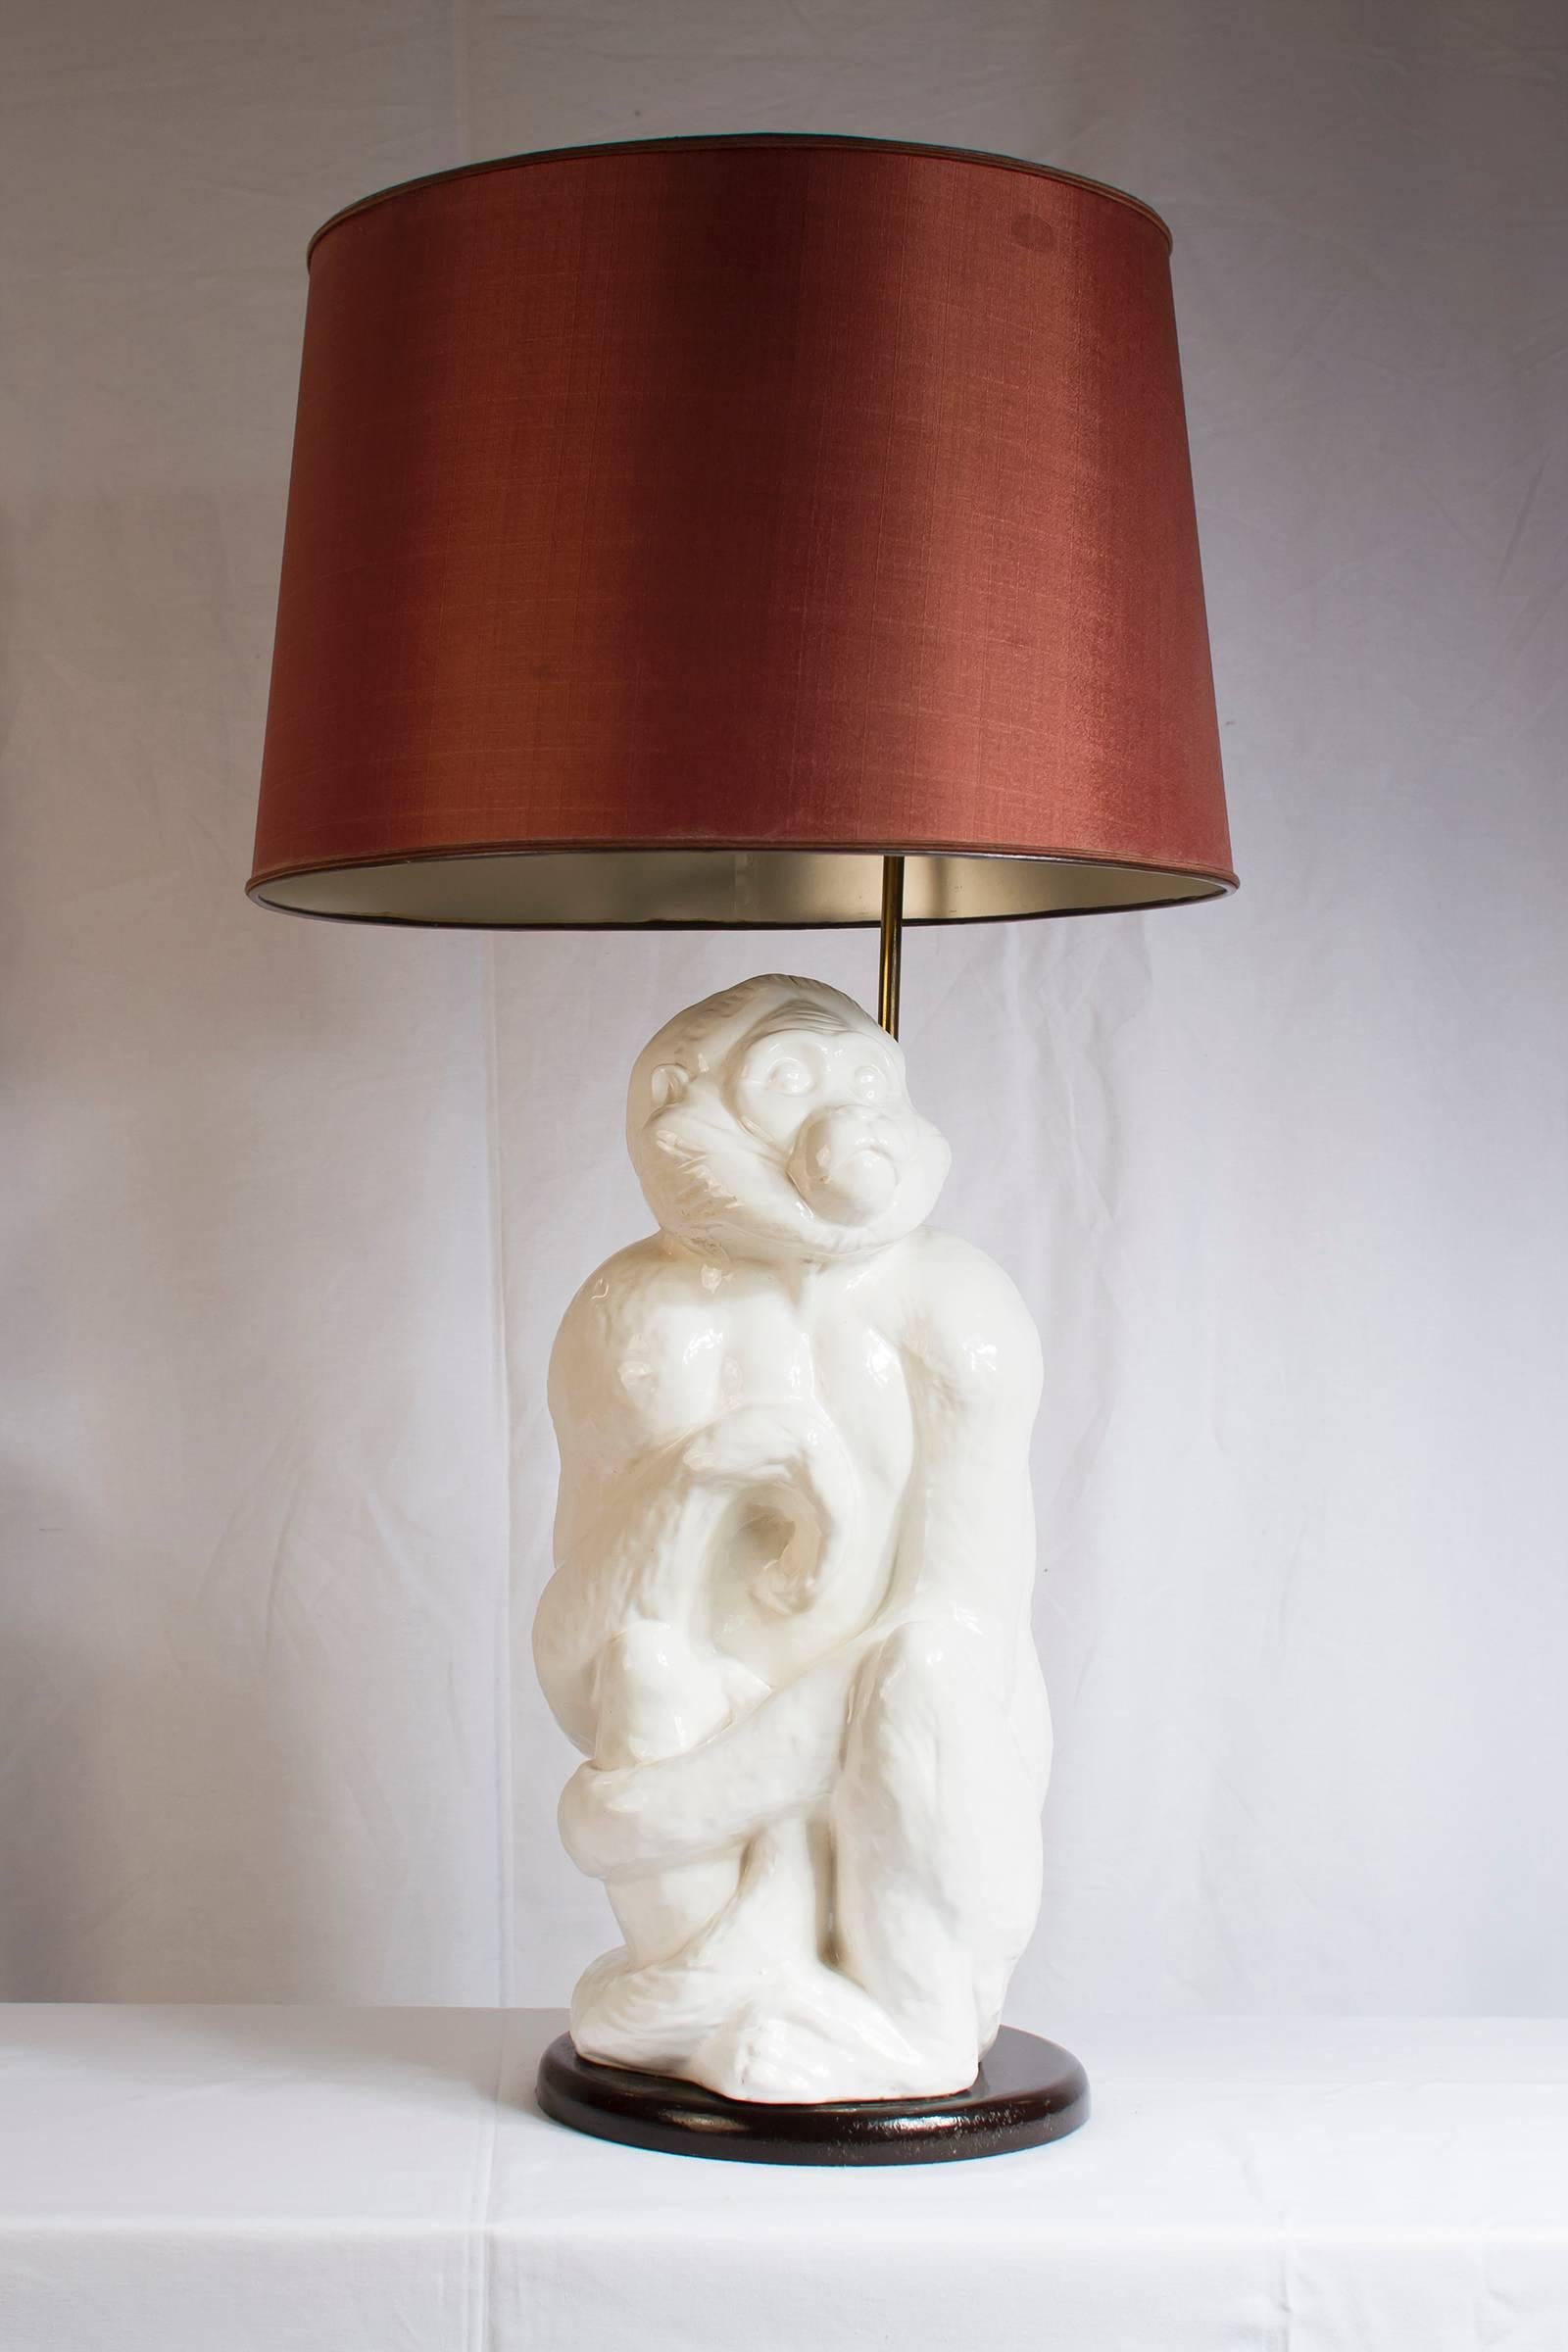 Wonderful Italian white ceramic monkey lamp, Italy, circa 1950s. The foot of the lampshade is adjustable in height.

Please contact us for delivery details.